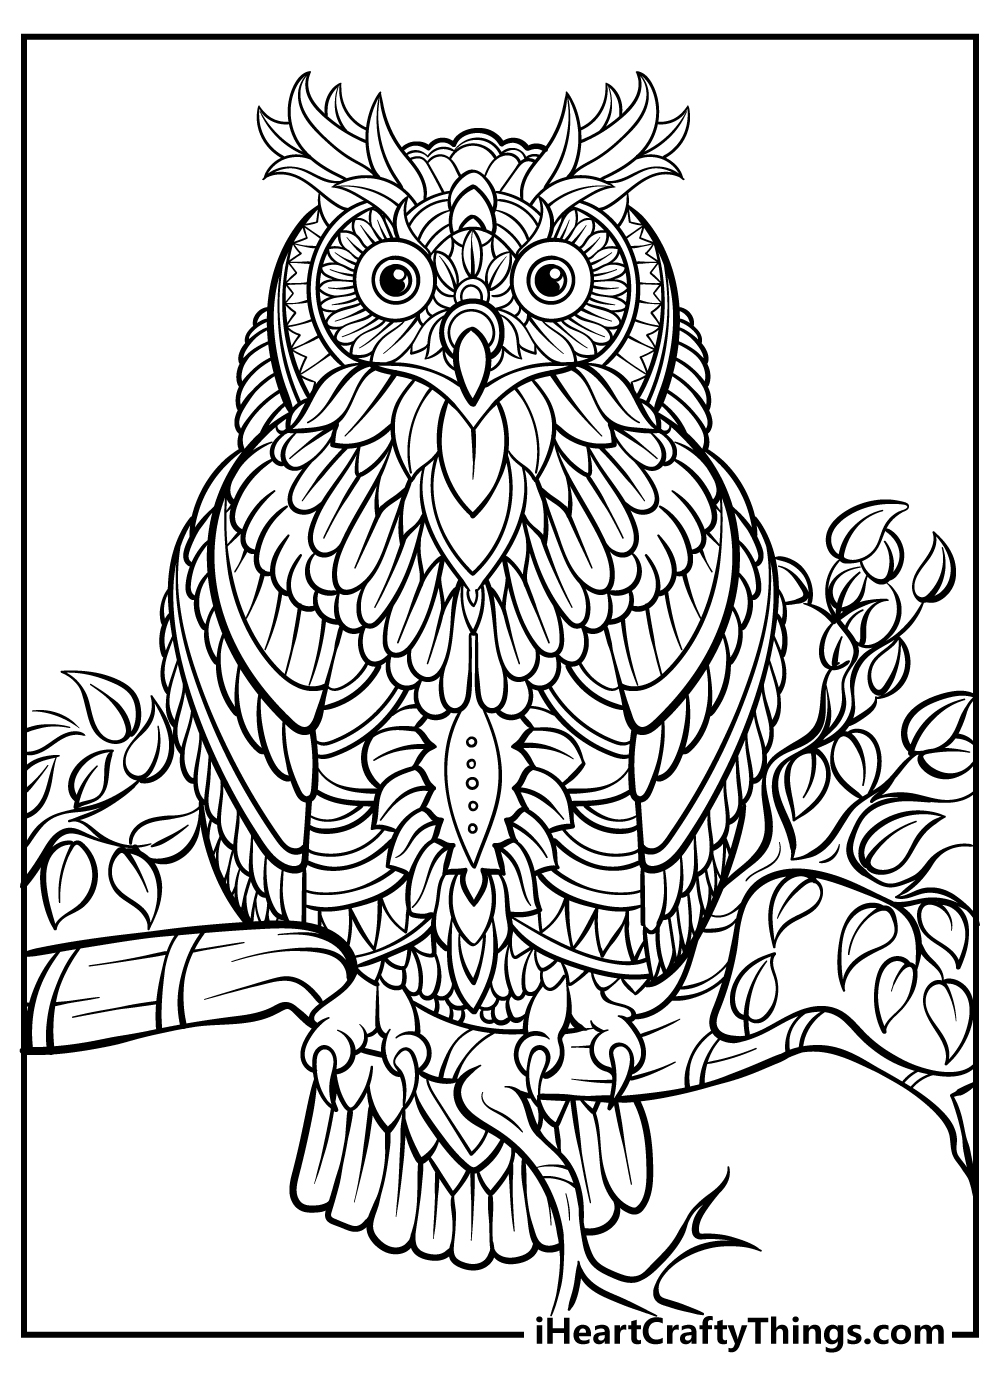 55+ Adult Coloring Pages Finished to Perfection - #7 is Stunning 194